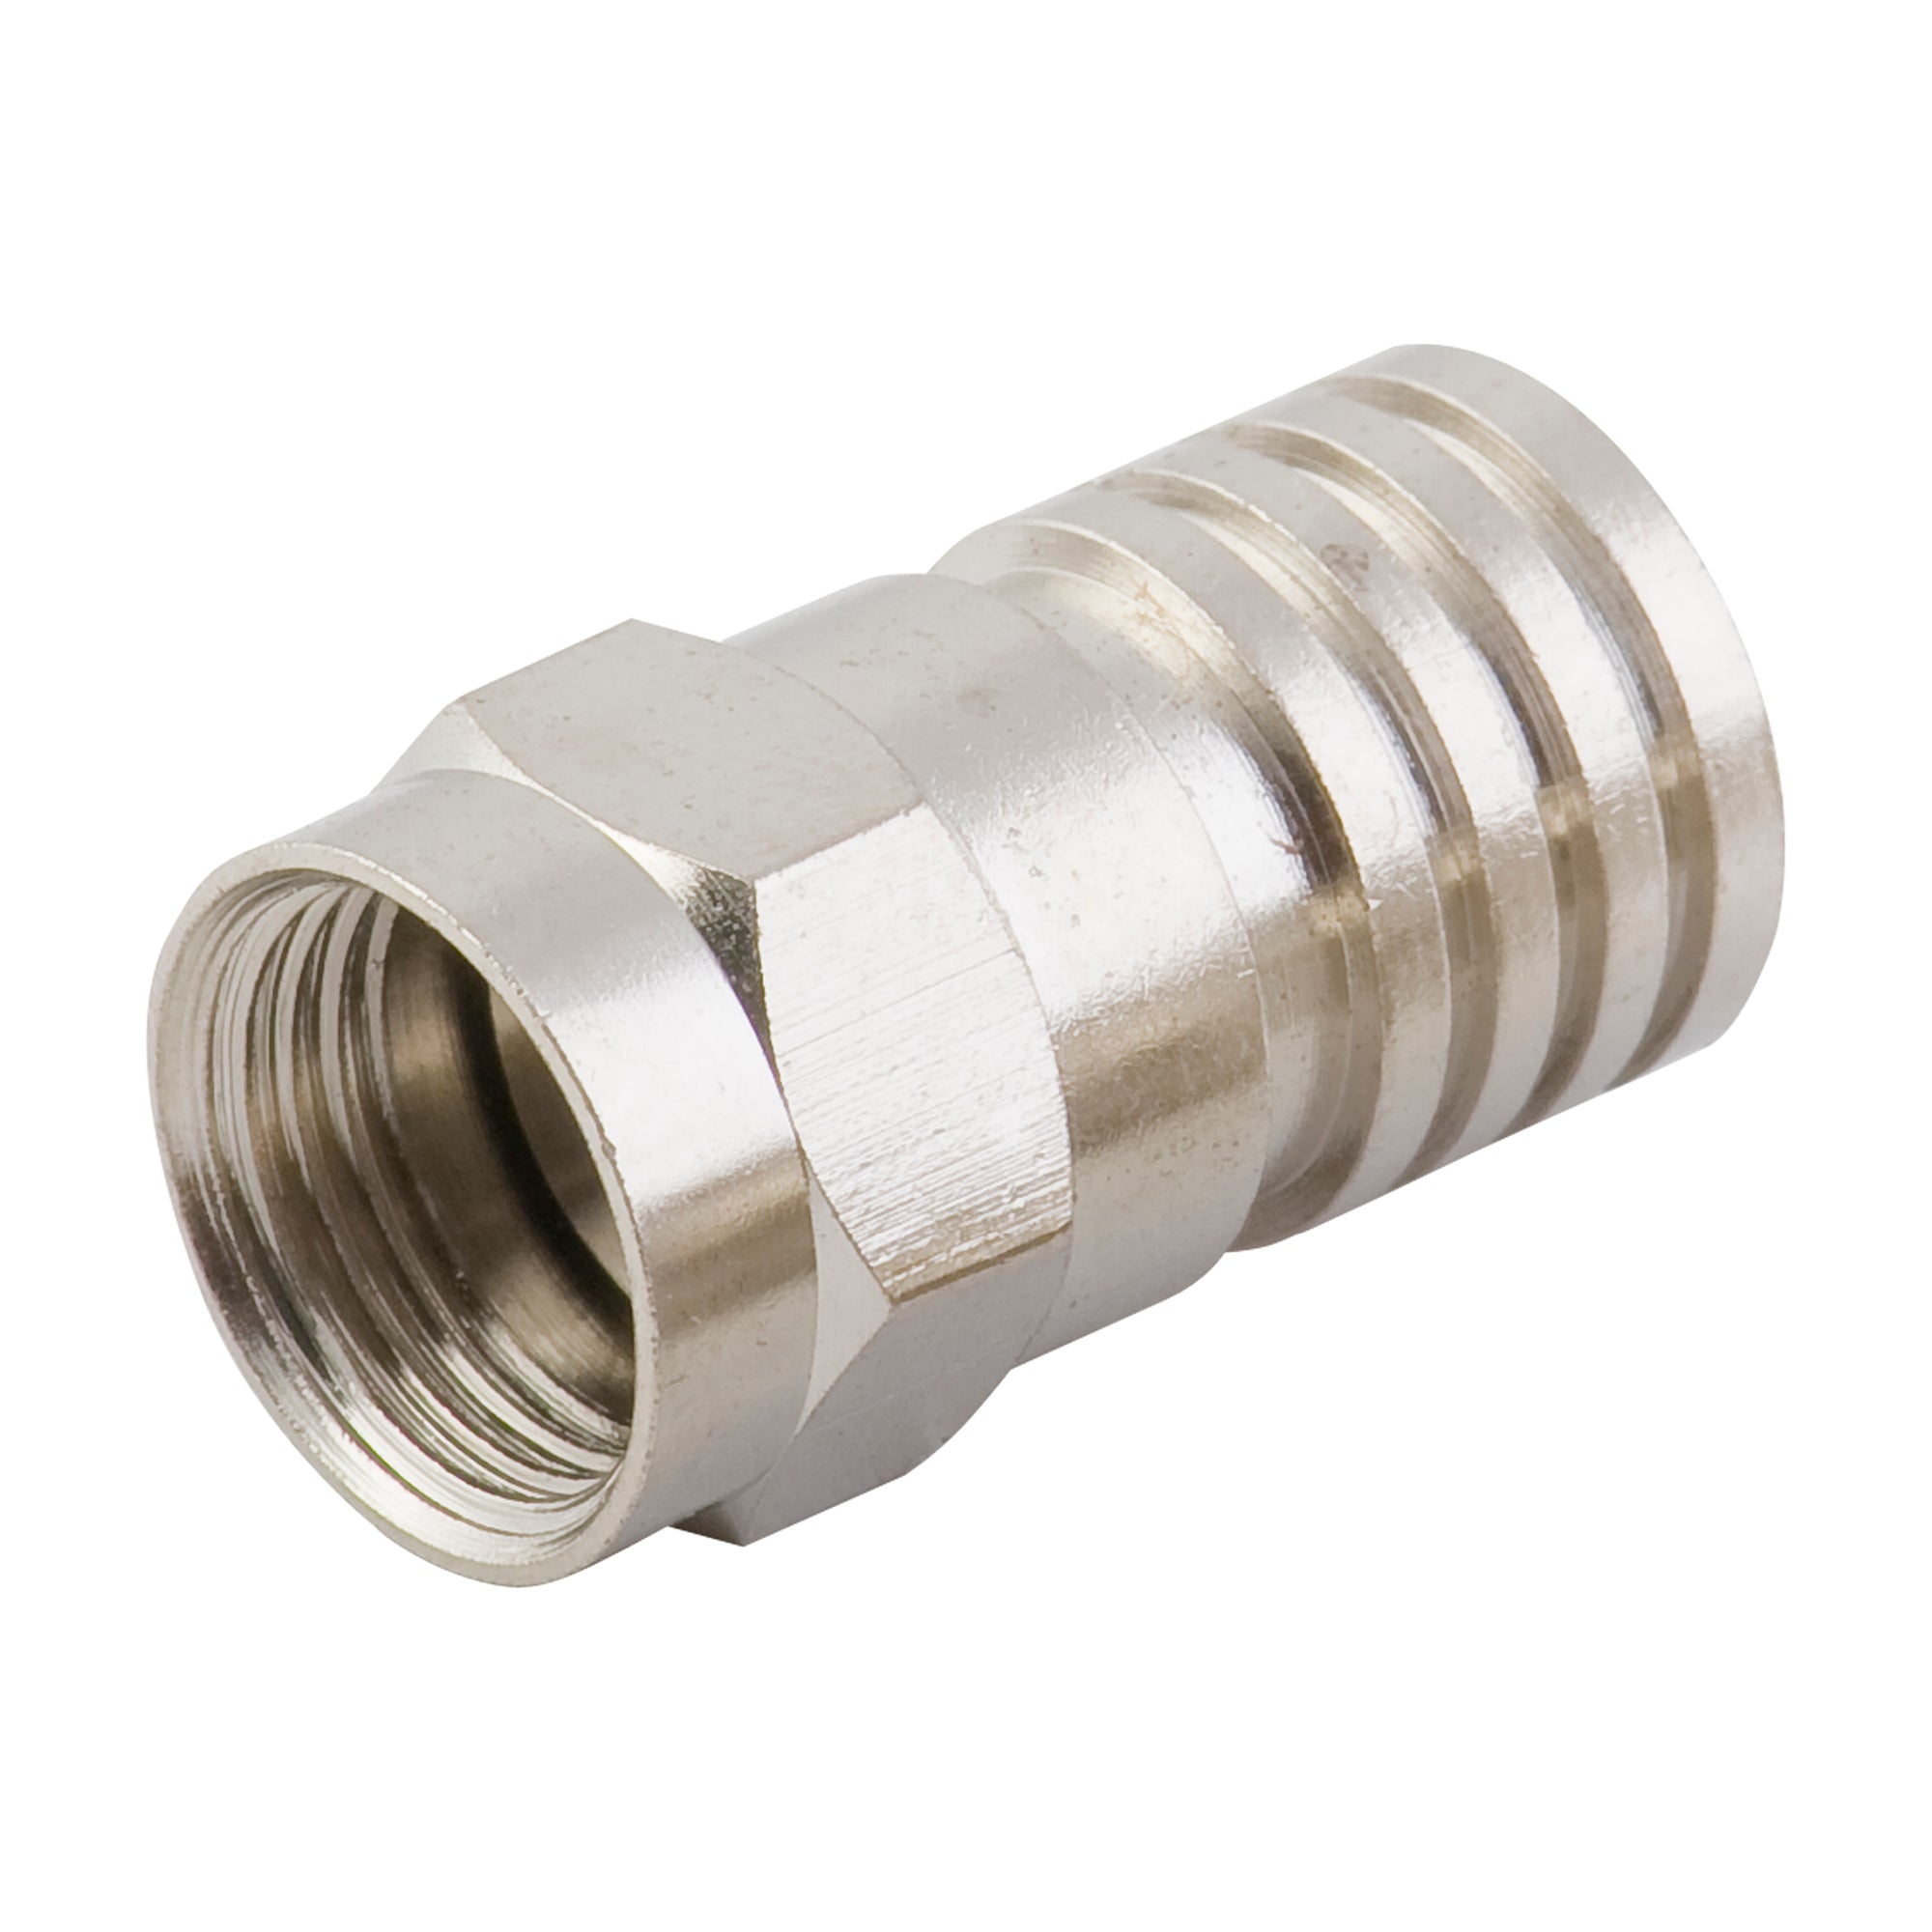 F59 Crimp Connector for RG6 Cable Heavy Gauge